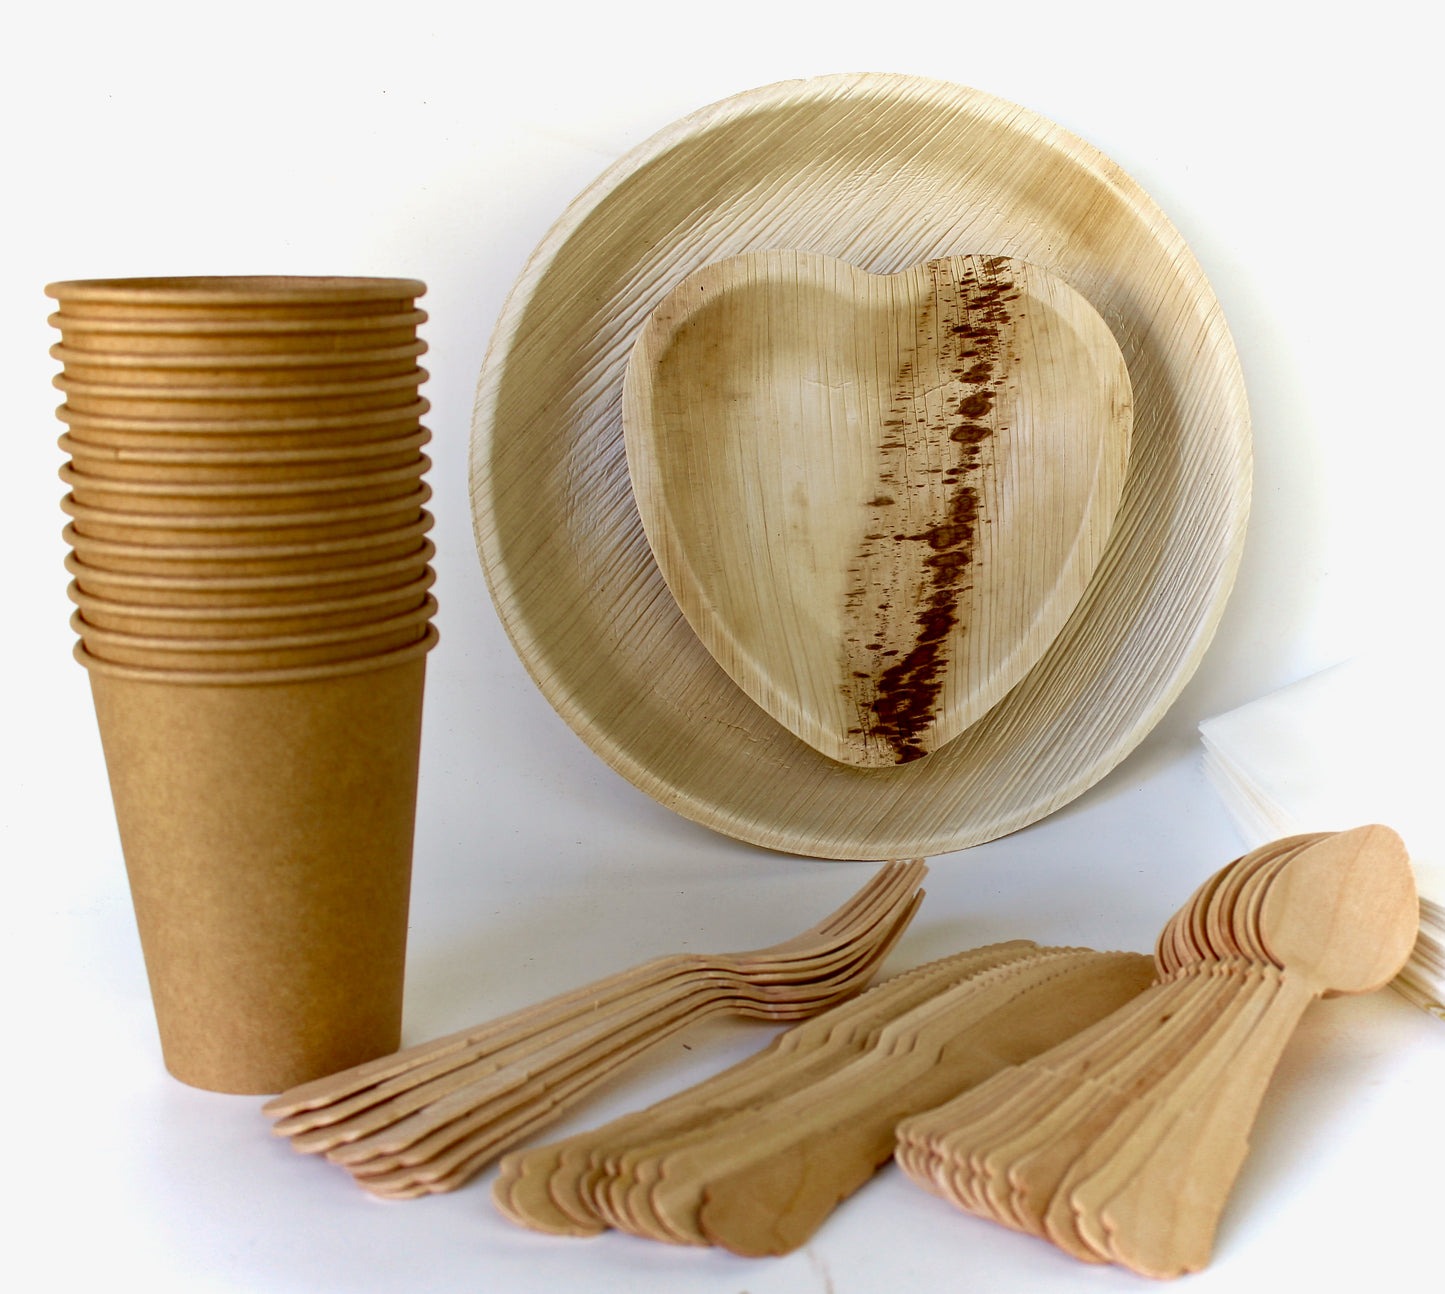 Bamboo type Palm leaf plate 25 Square  10" - 25 Heart 6"- 25 pic Square 6"- 30 napkin  - 75 Pic Utensils - 25 Coup - 25 pic napkin